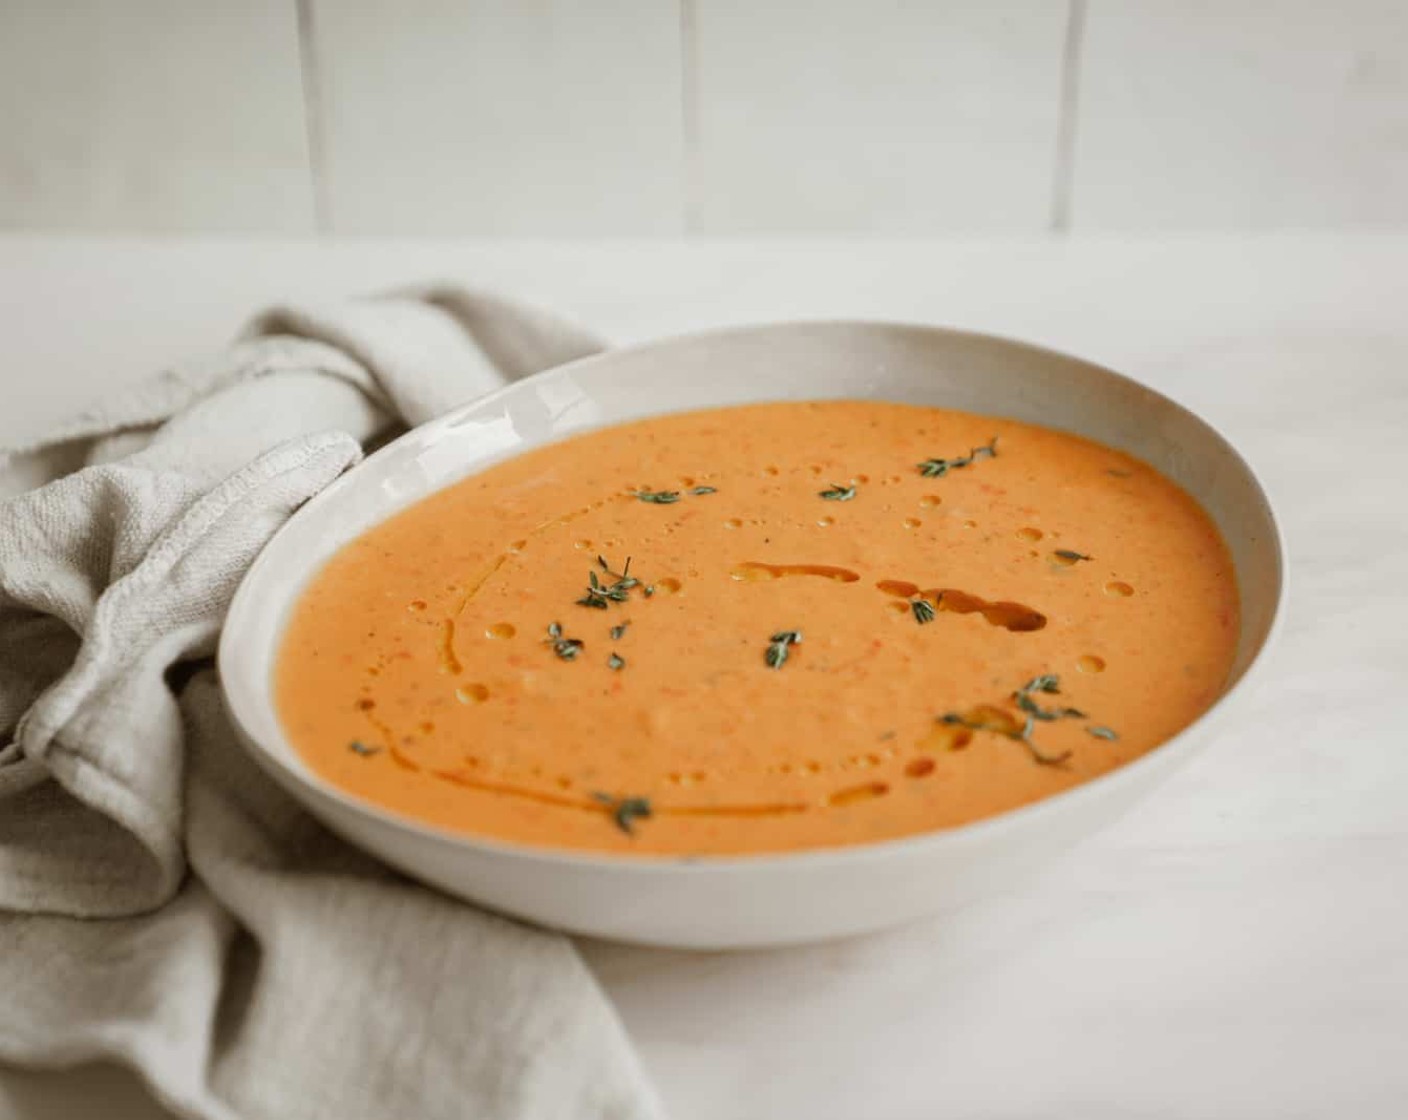 Sheet Pan Roasted Red Pepper and Tomato Soup